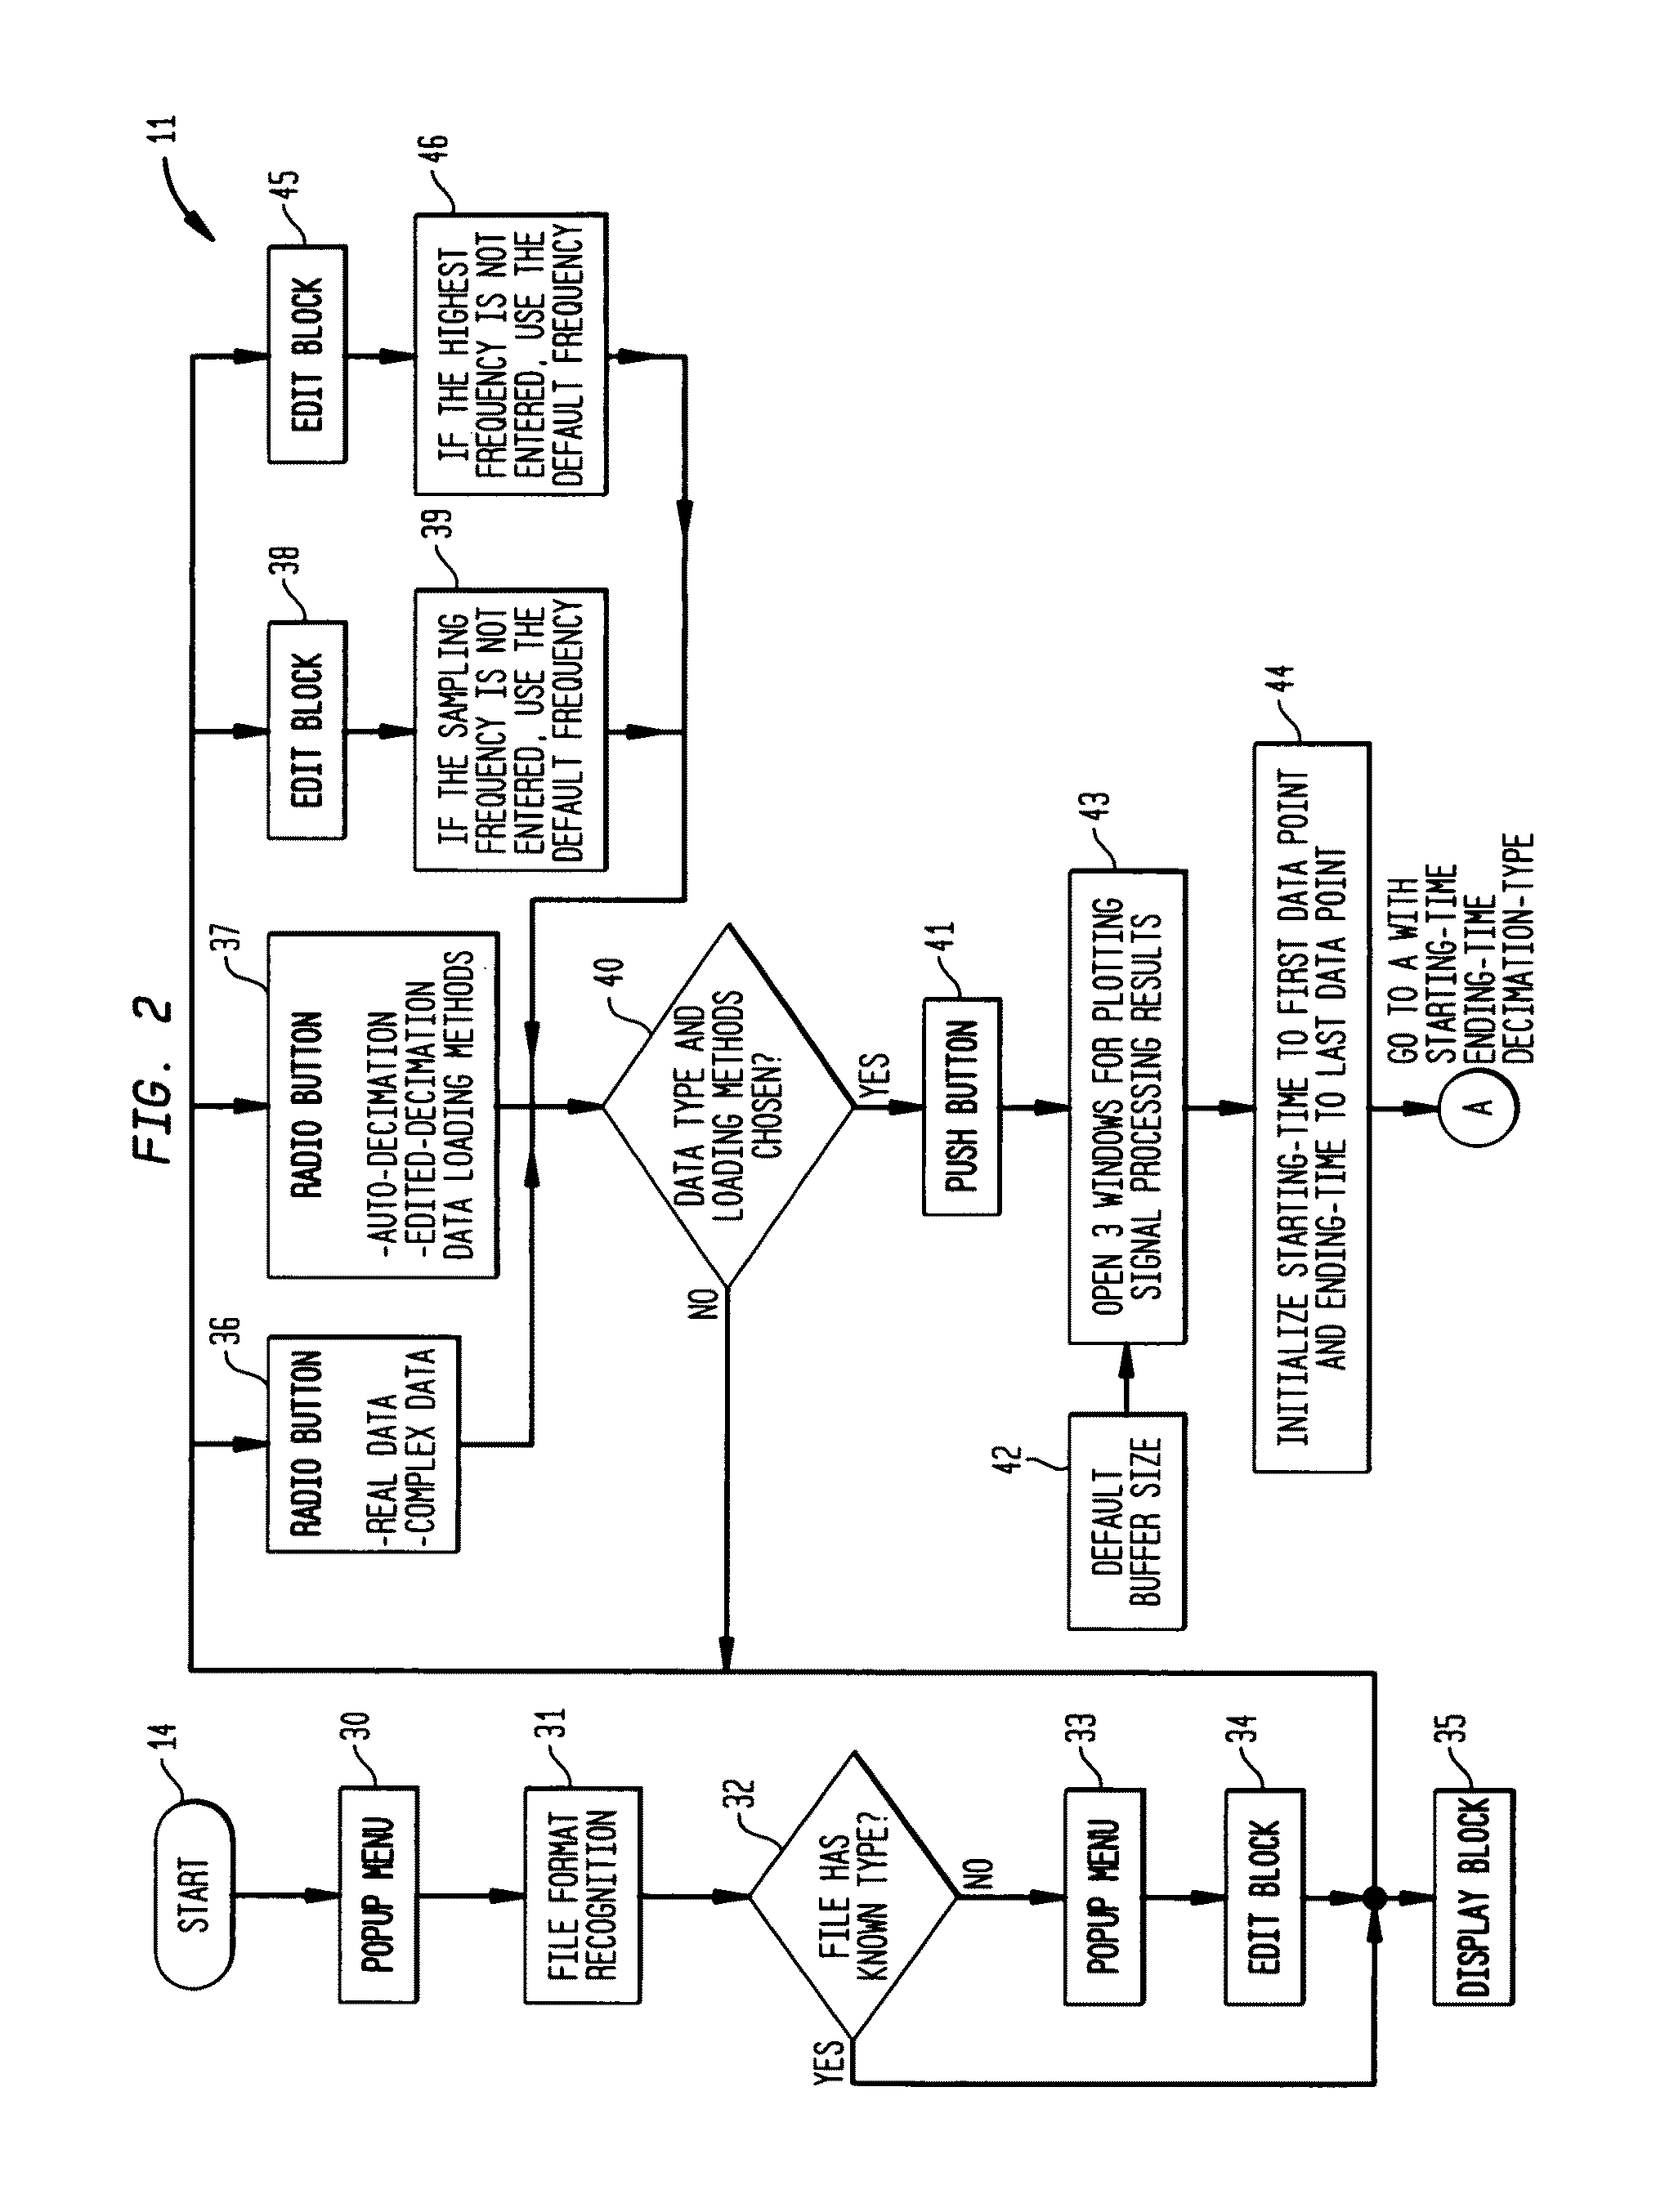 Graphic user interface and software for processing large size signal data samples in a small buffer using automatically adjusted decimation ratio